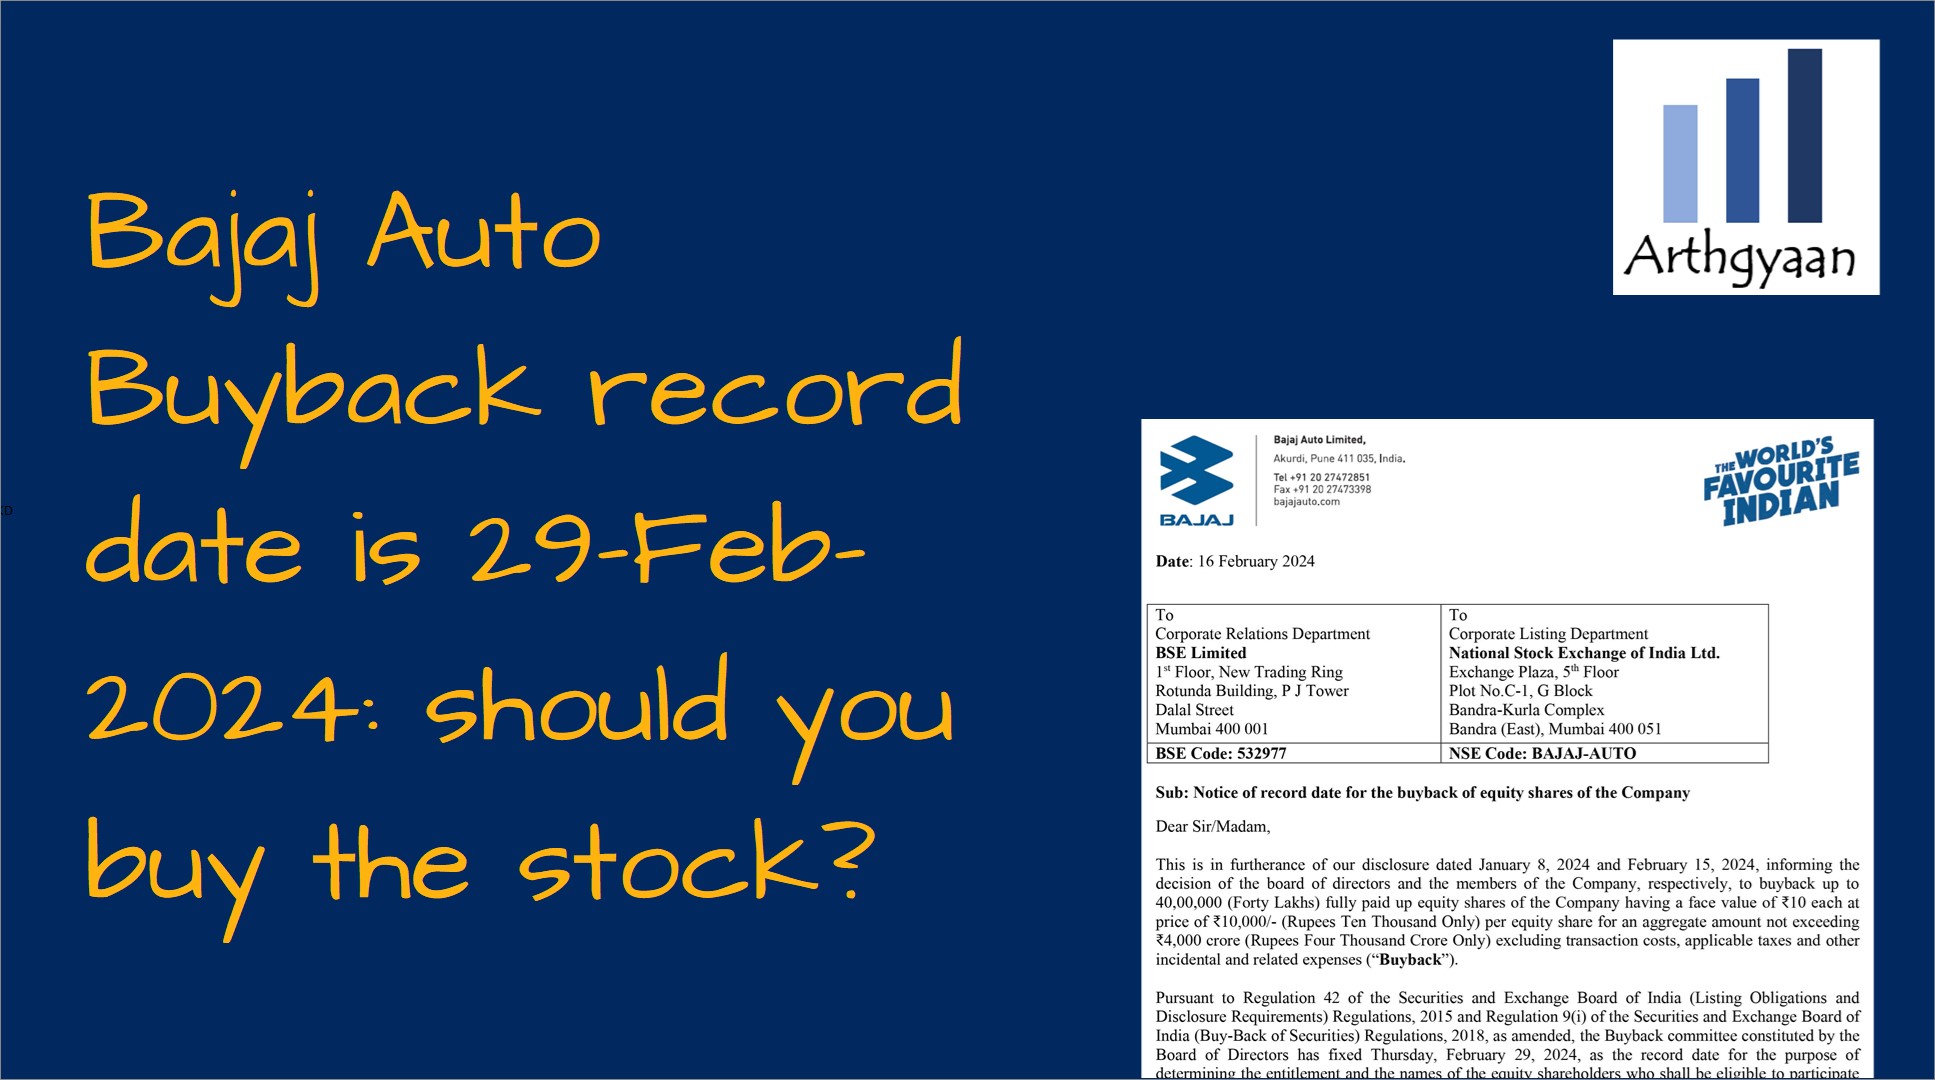 Bajaj Auto Buyback record date is 29-Feb-2024: should you buy the stock?